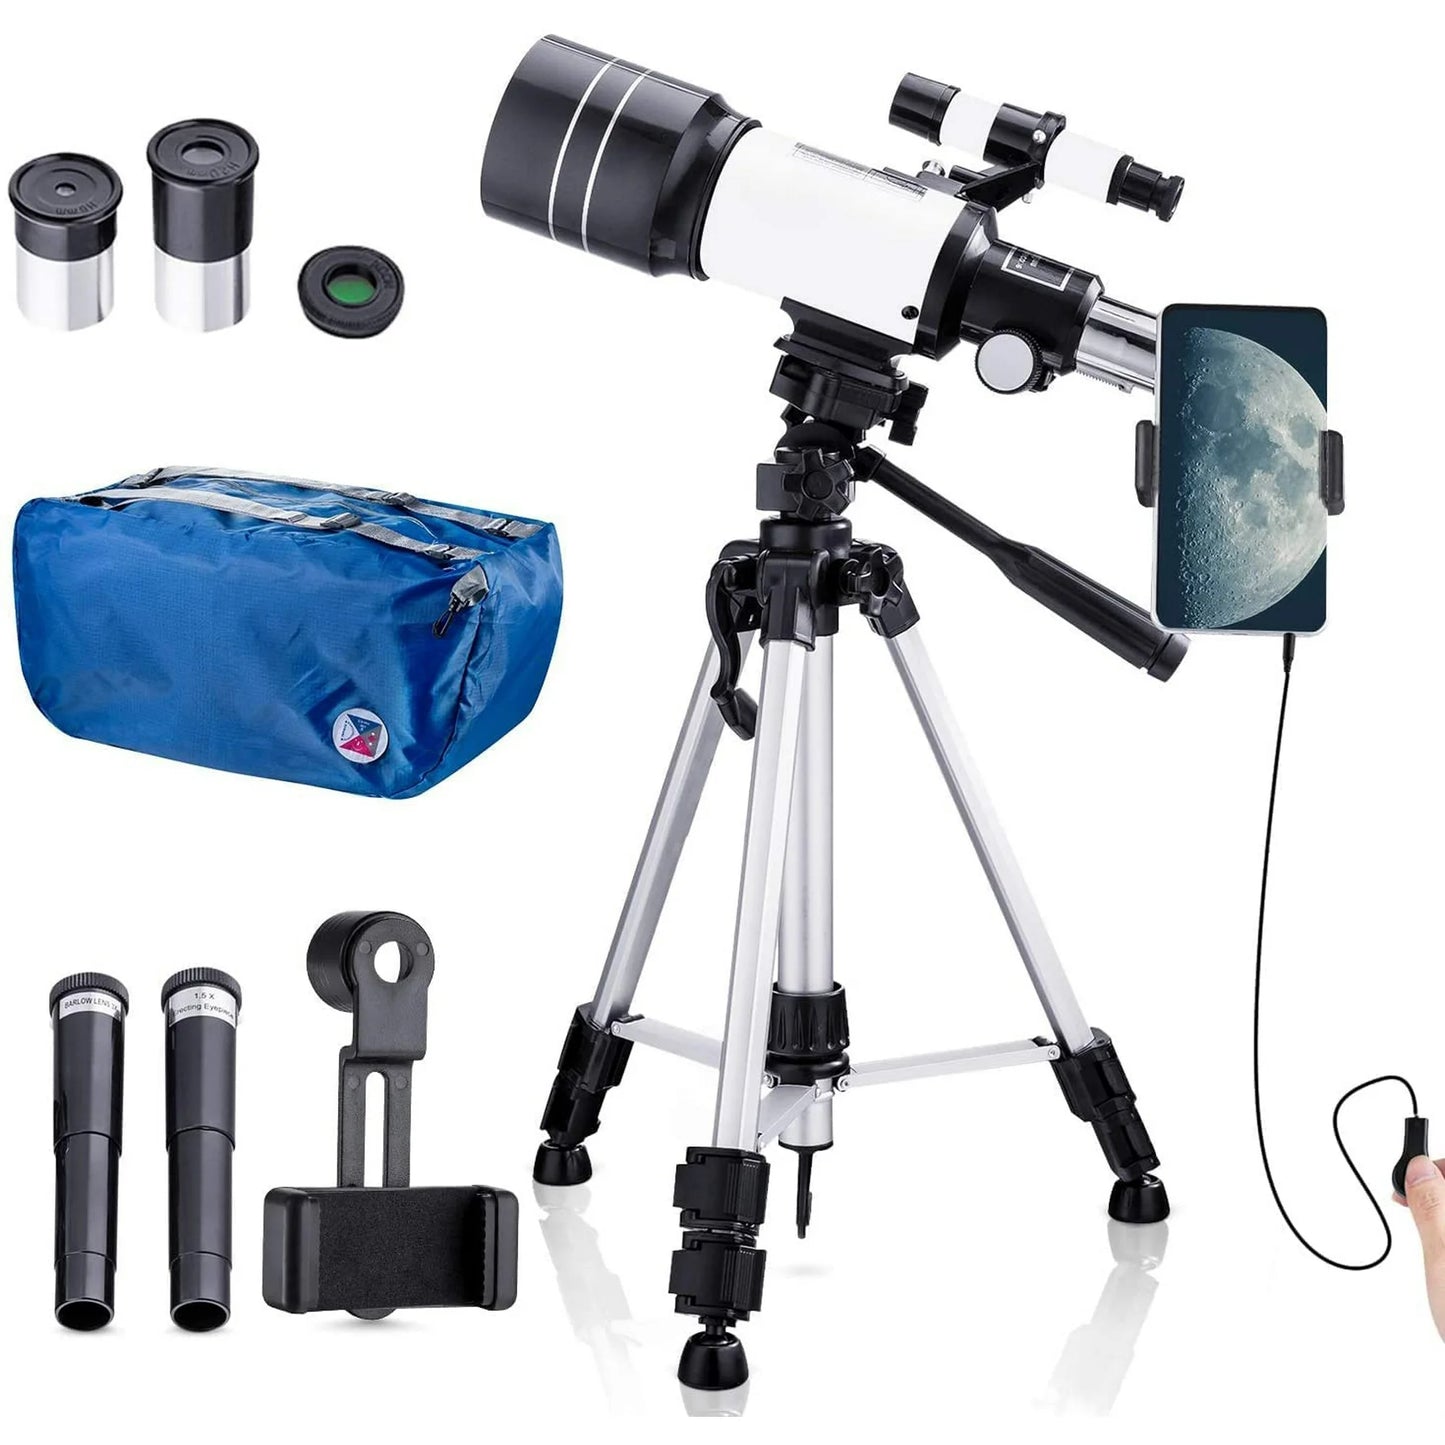 Telescope for Kids Beginners,150X Astronomy Monocular Telescopes 300/70mm with Phone Adapter, Camera Wire Shutter, Moon Filter and Backpack- Adjustable Tall Tripod